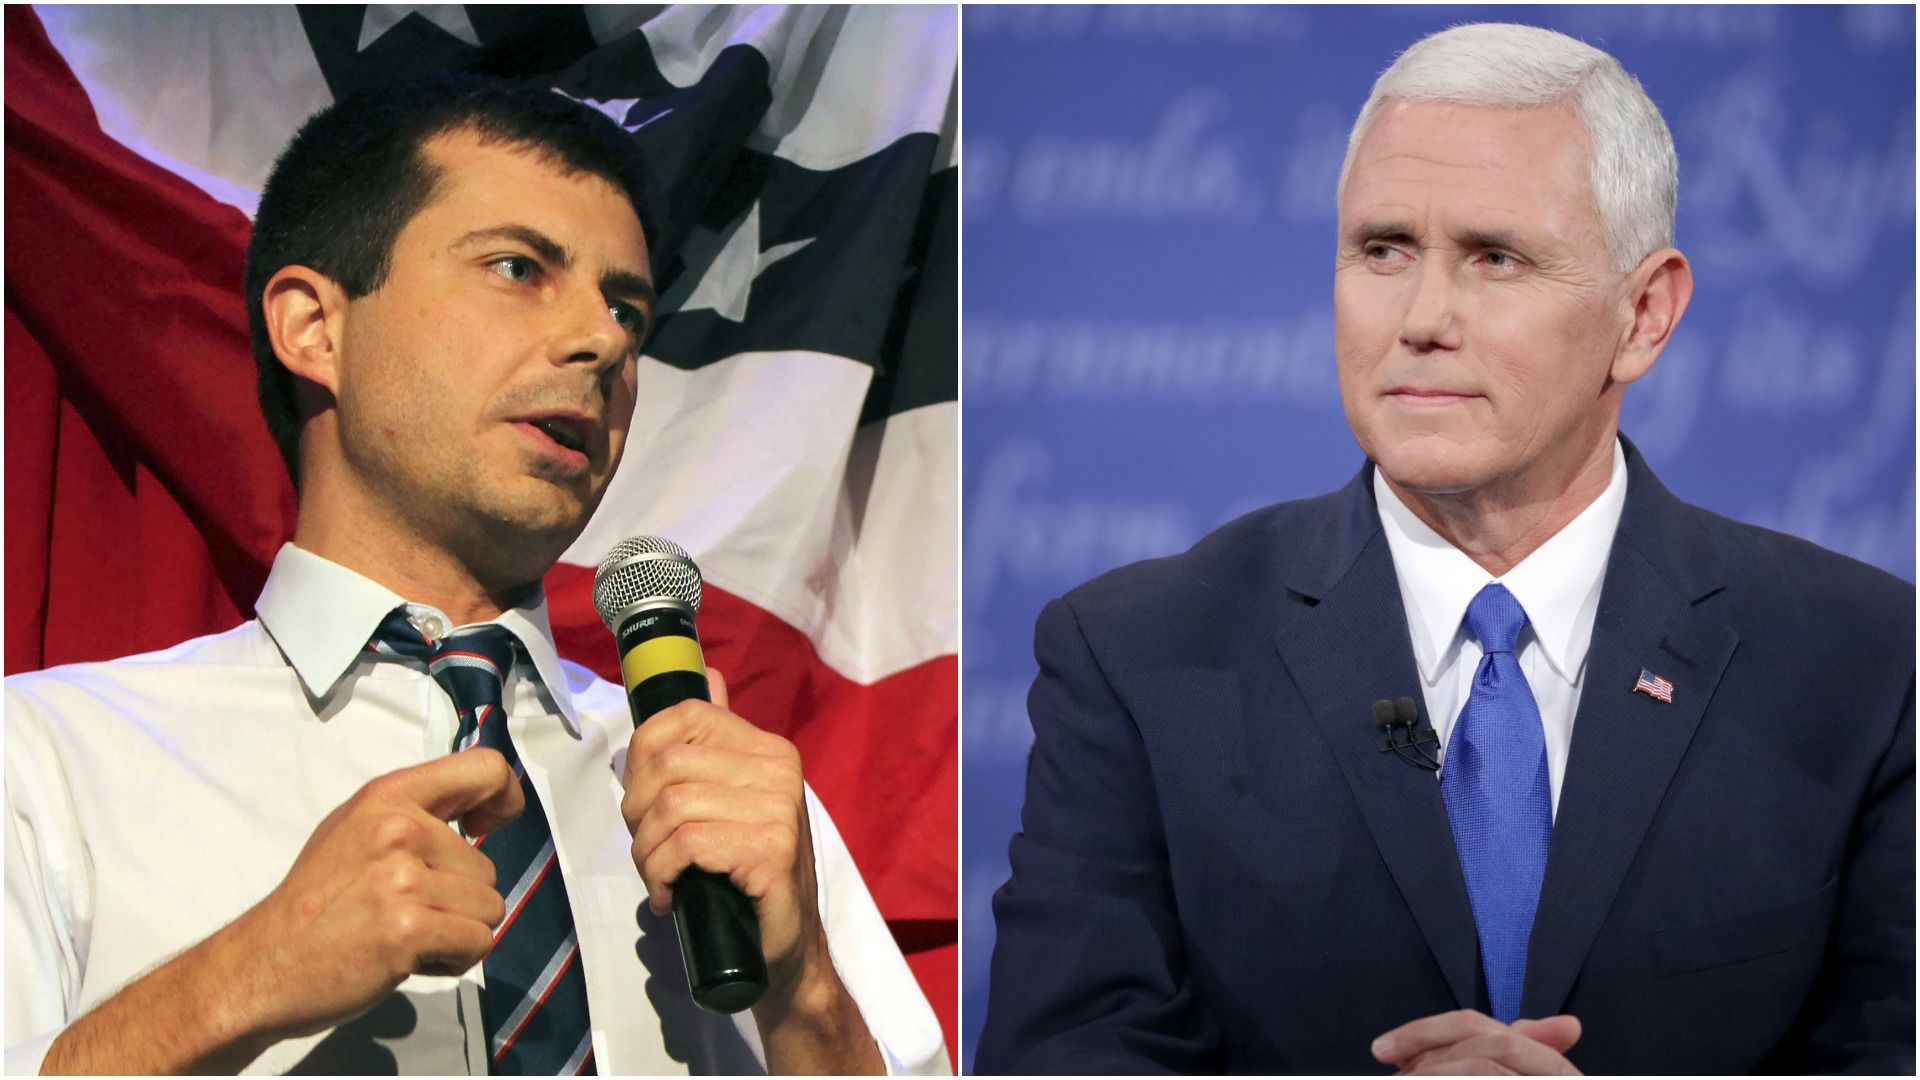  2020 Democratic presidential candidate Peter Buttigieg and Vice President Mike Pence